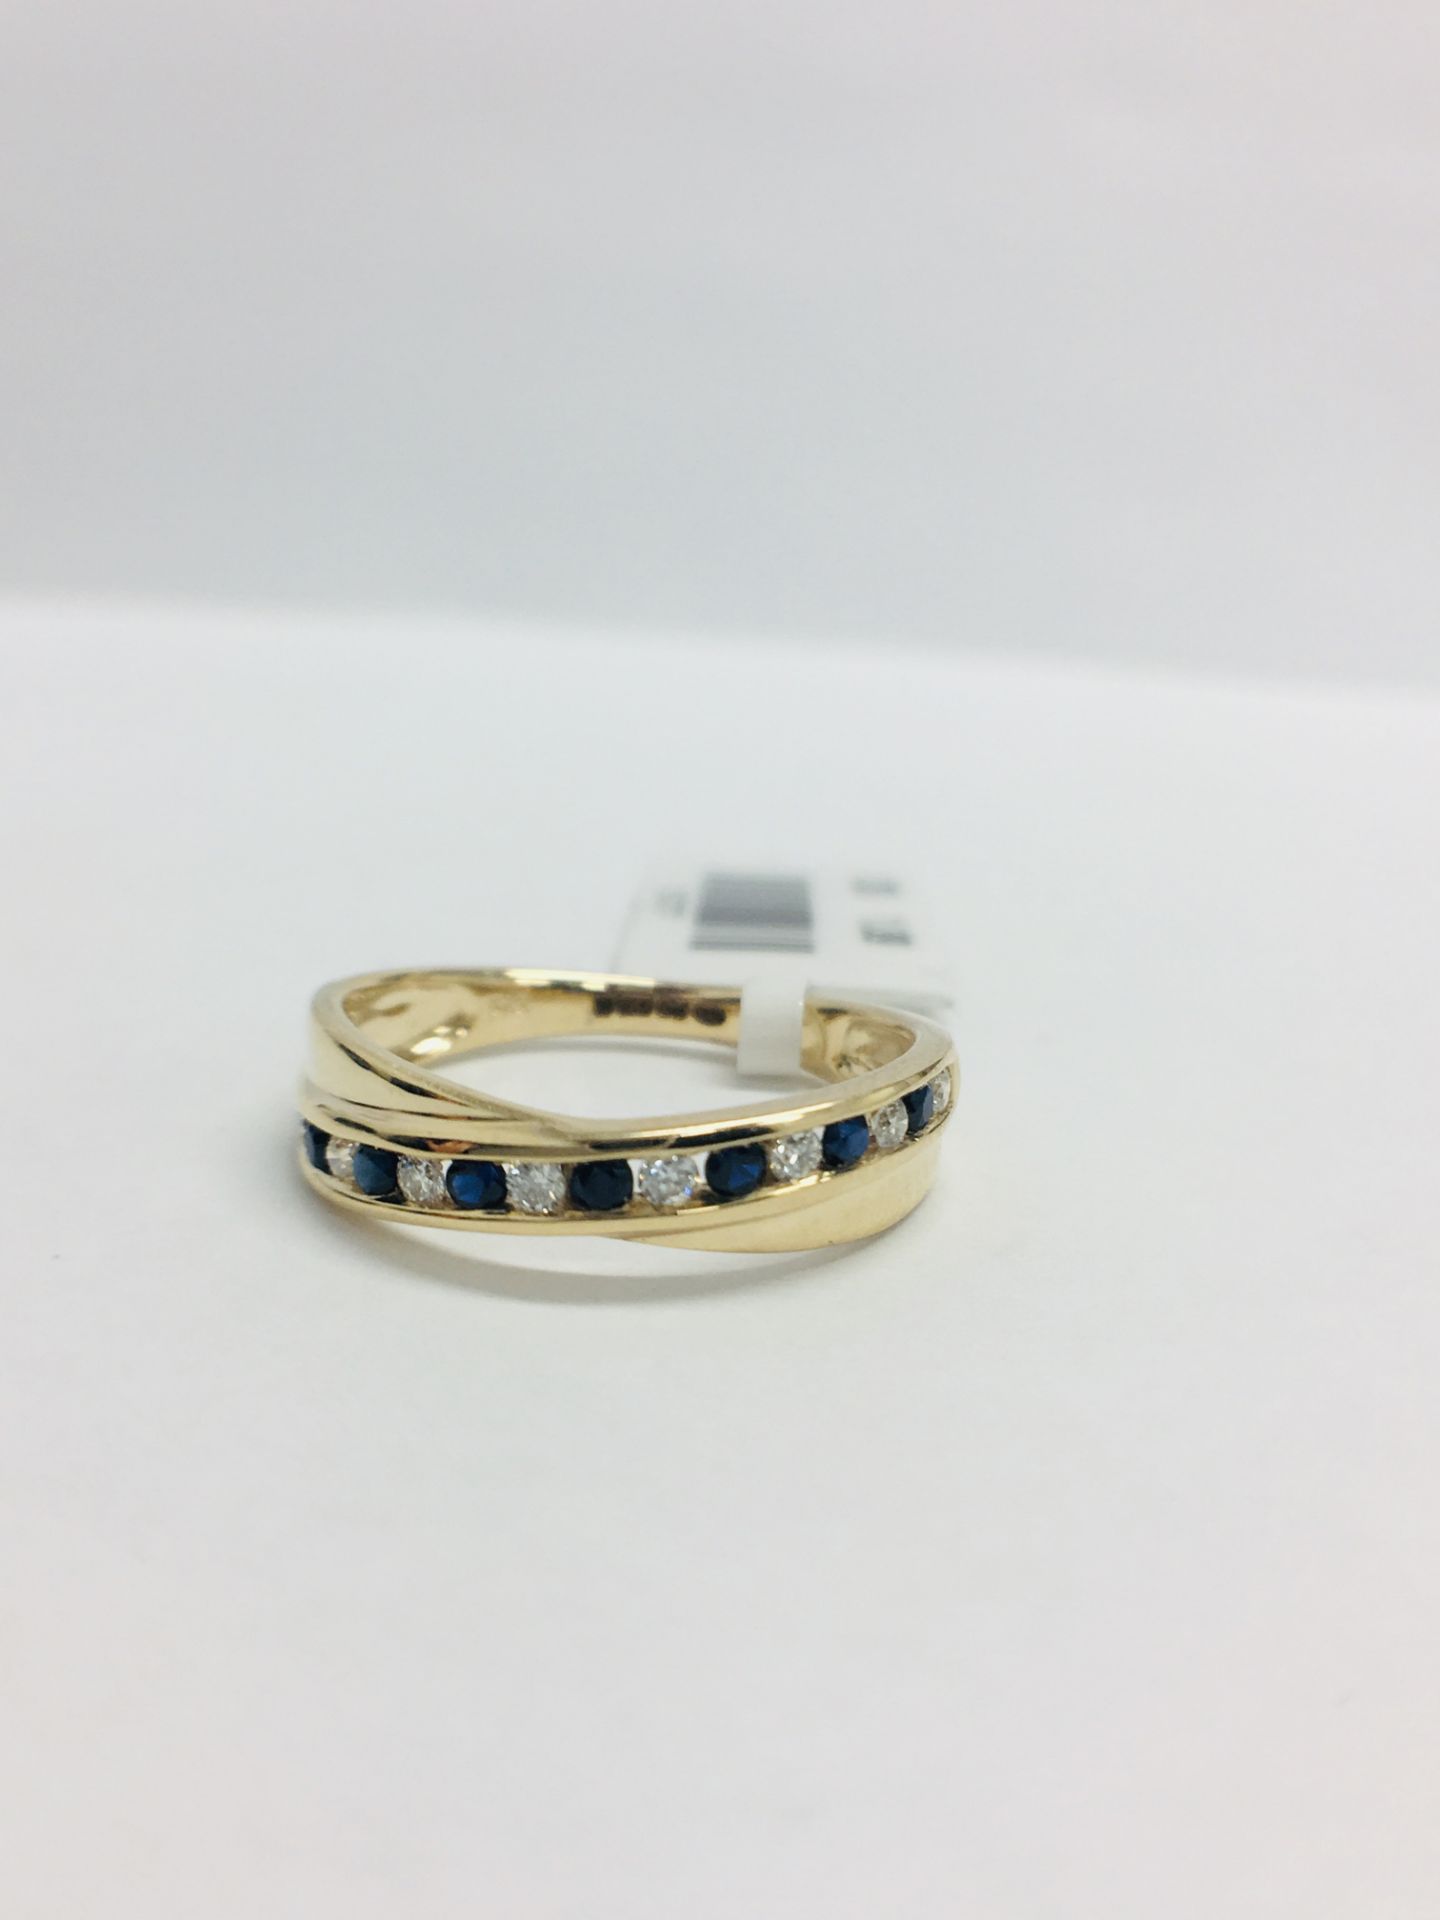 9ct Yellow Gold Sapphire Diamond Crossover Band Ring - Image 10 of 11